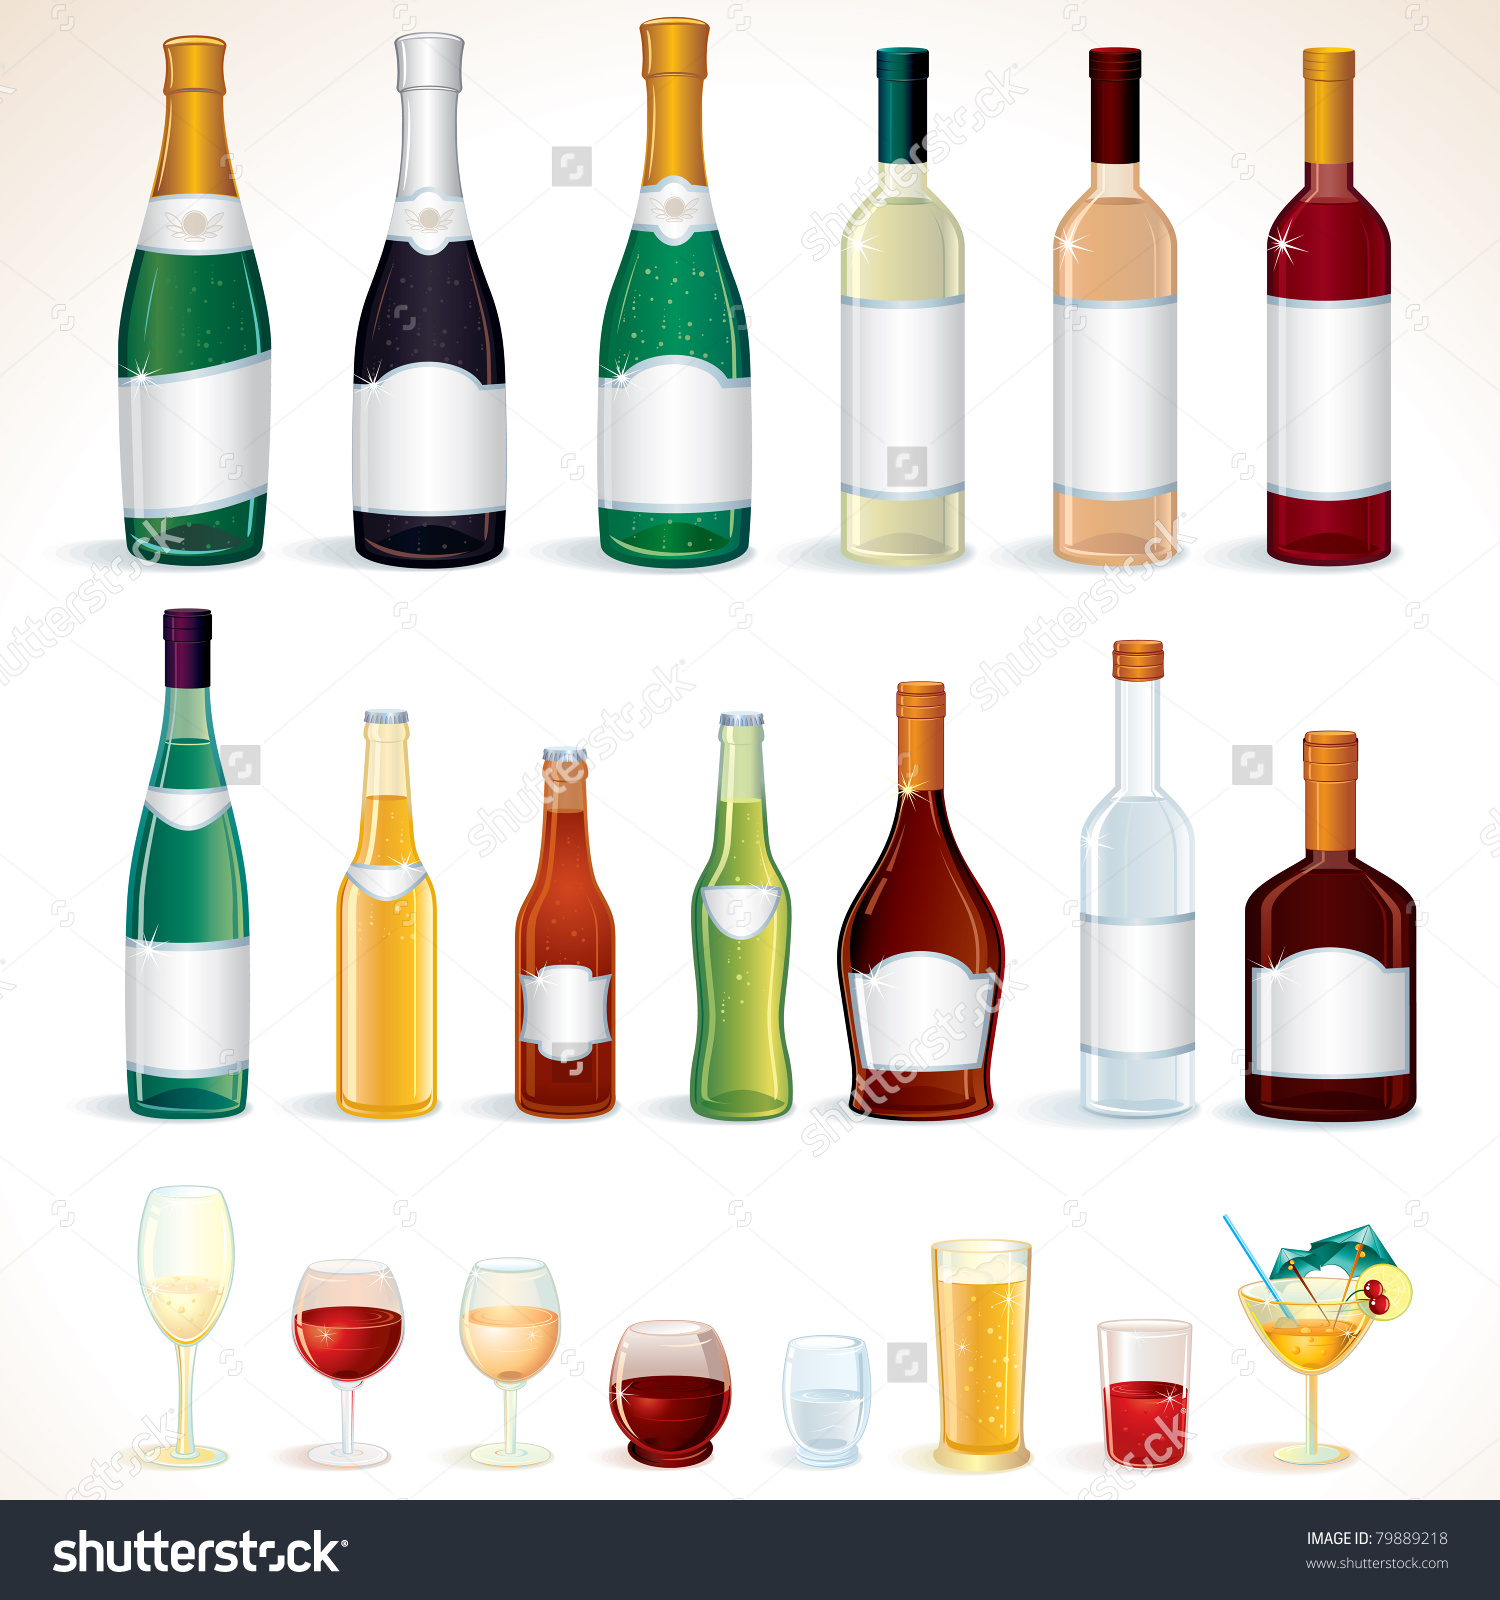 Free alcohol clipart image 